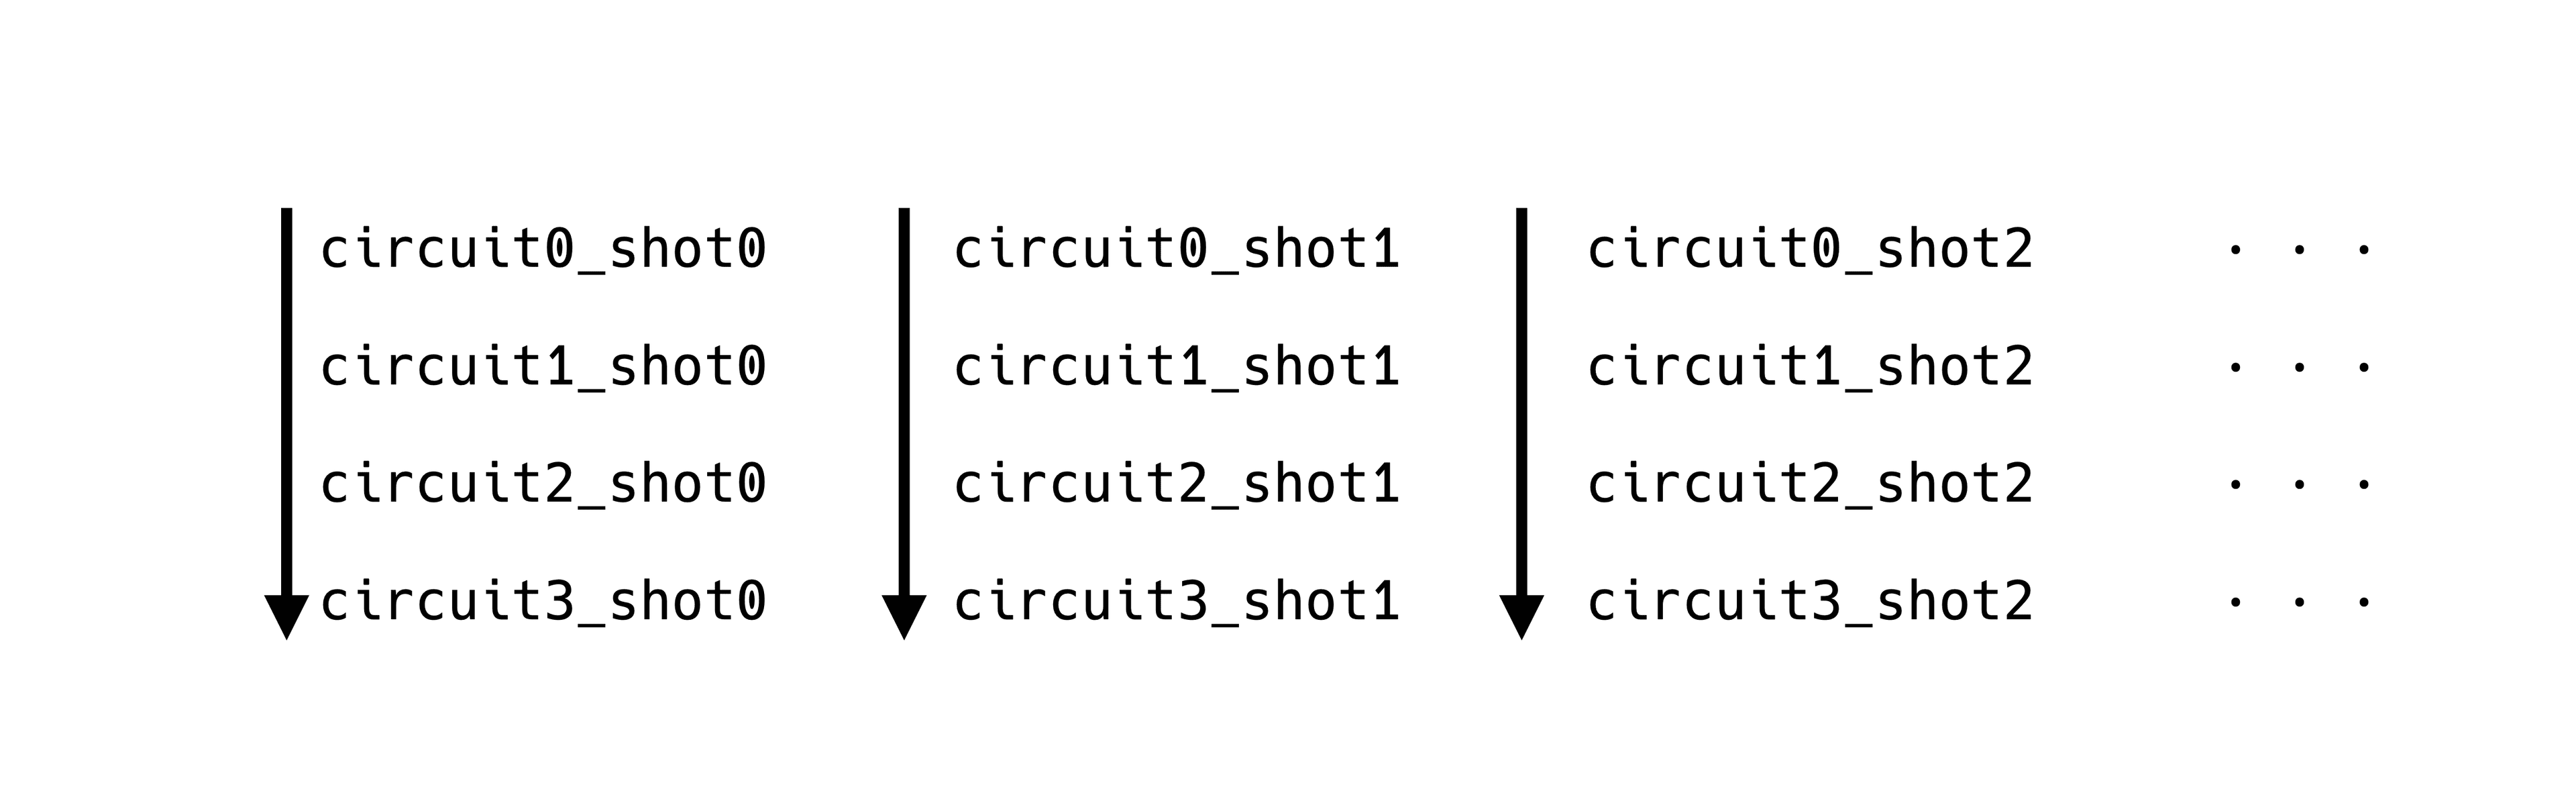 The first column represents shot 0.  The circuits are run in order from 0 through 3.  The second column represents shot 1.  The circuits are run in order from 0 through 3.  The remaining columns follow the same pattern. 